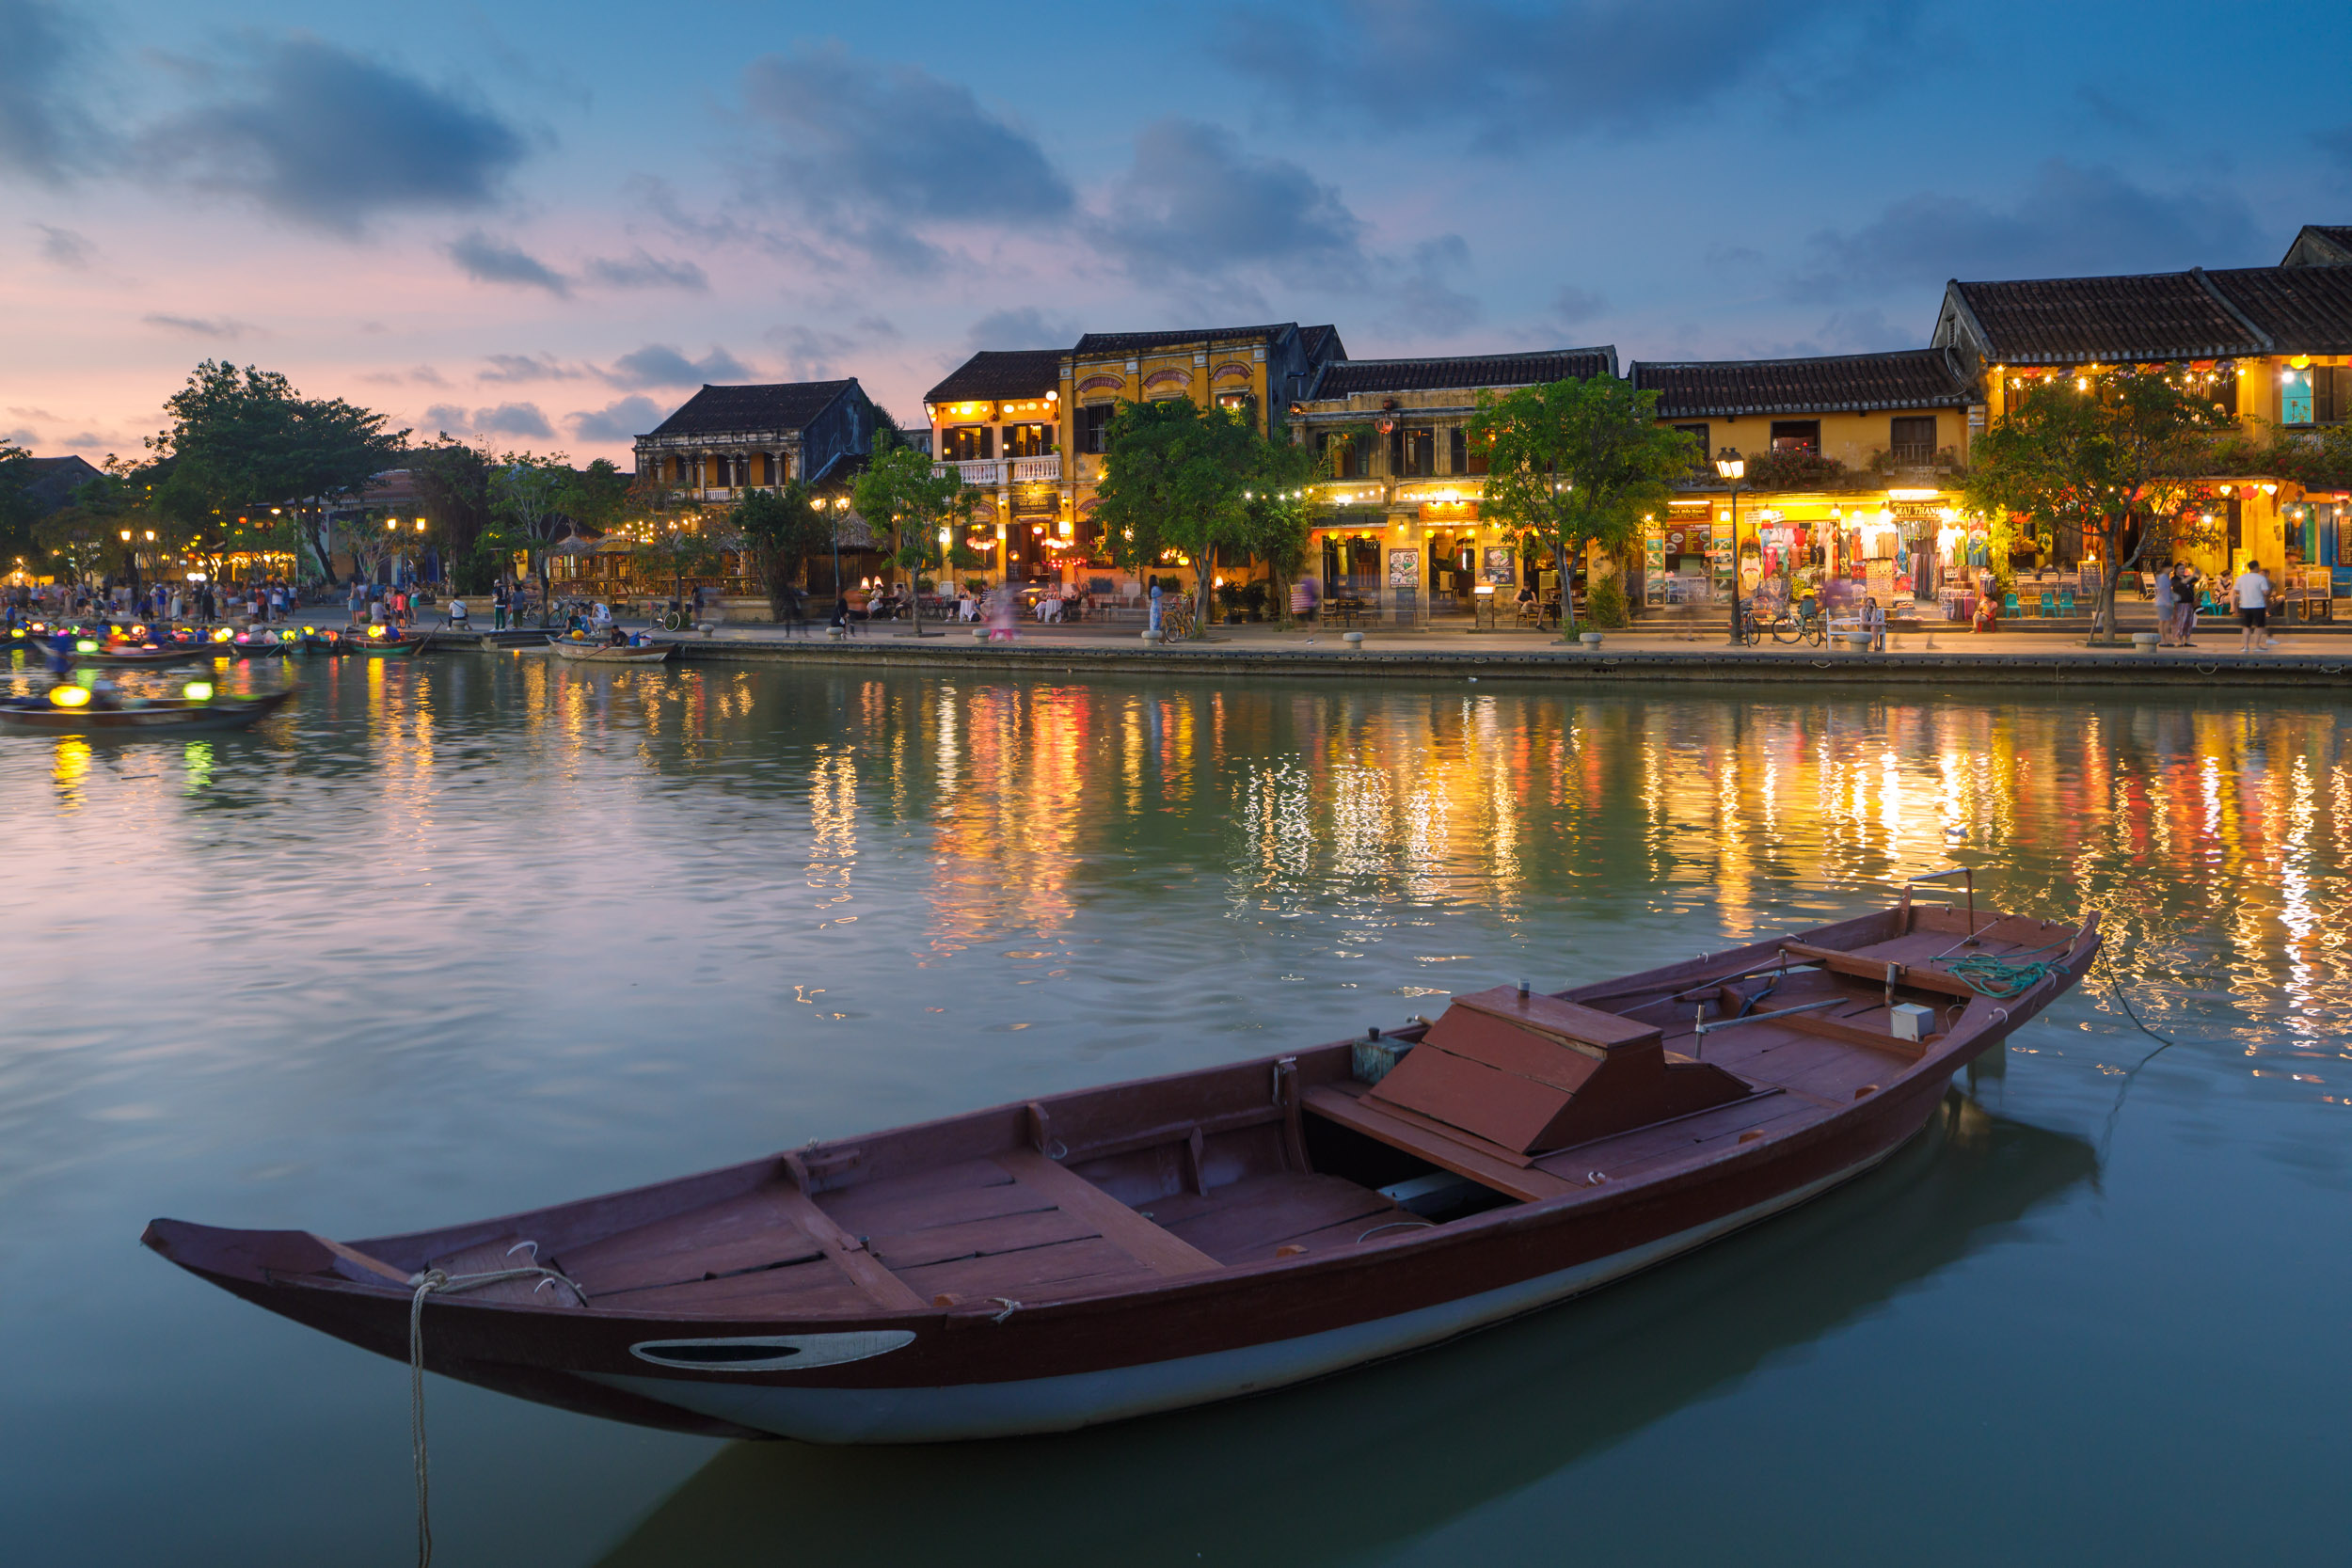 The old town of Hoi An in Quang Nam, Vietnam.